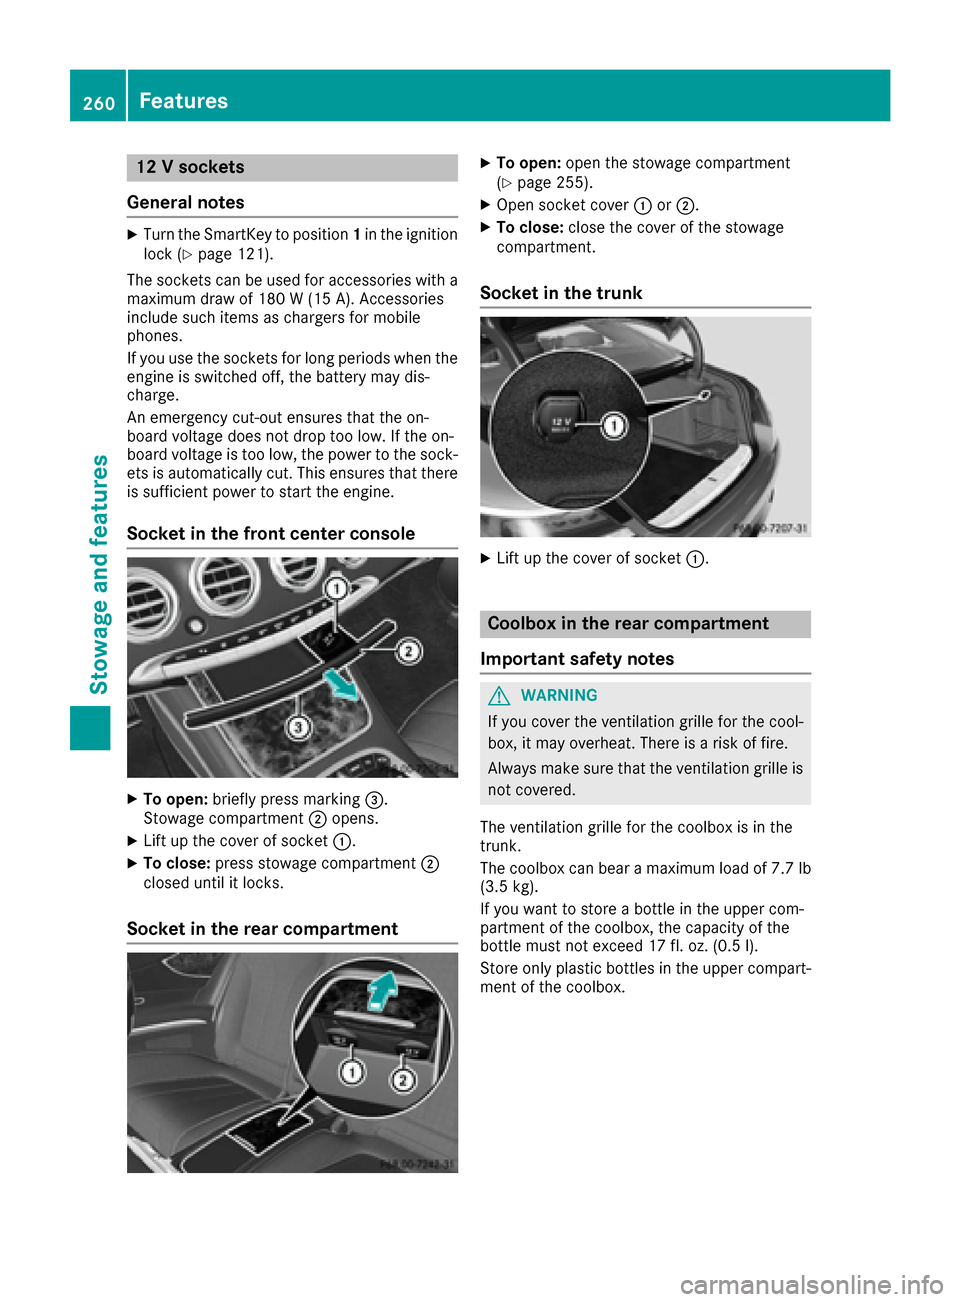 MERCEDES-BENZ S-Class COUPE 2017 C217 Owners Guide 12 V sockets
General notes
XTurn the SmartKey to position 1in the ignition
lock (Ypage 121).
The sockets can be used for accessories with a maximum draw of 180 W (15 A). Accessories
include such items